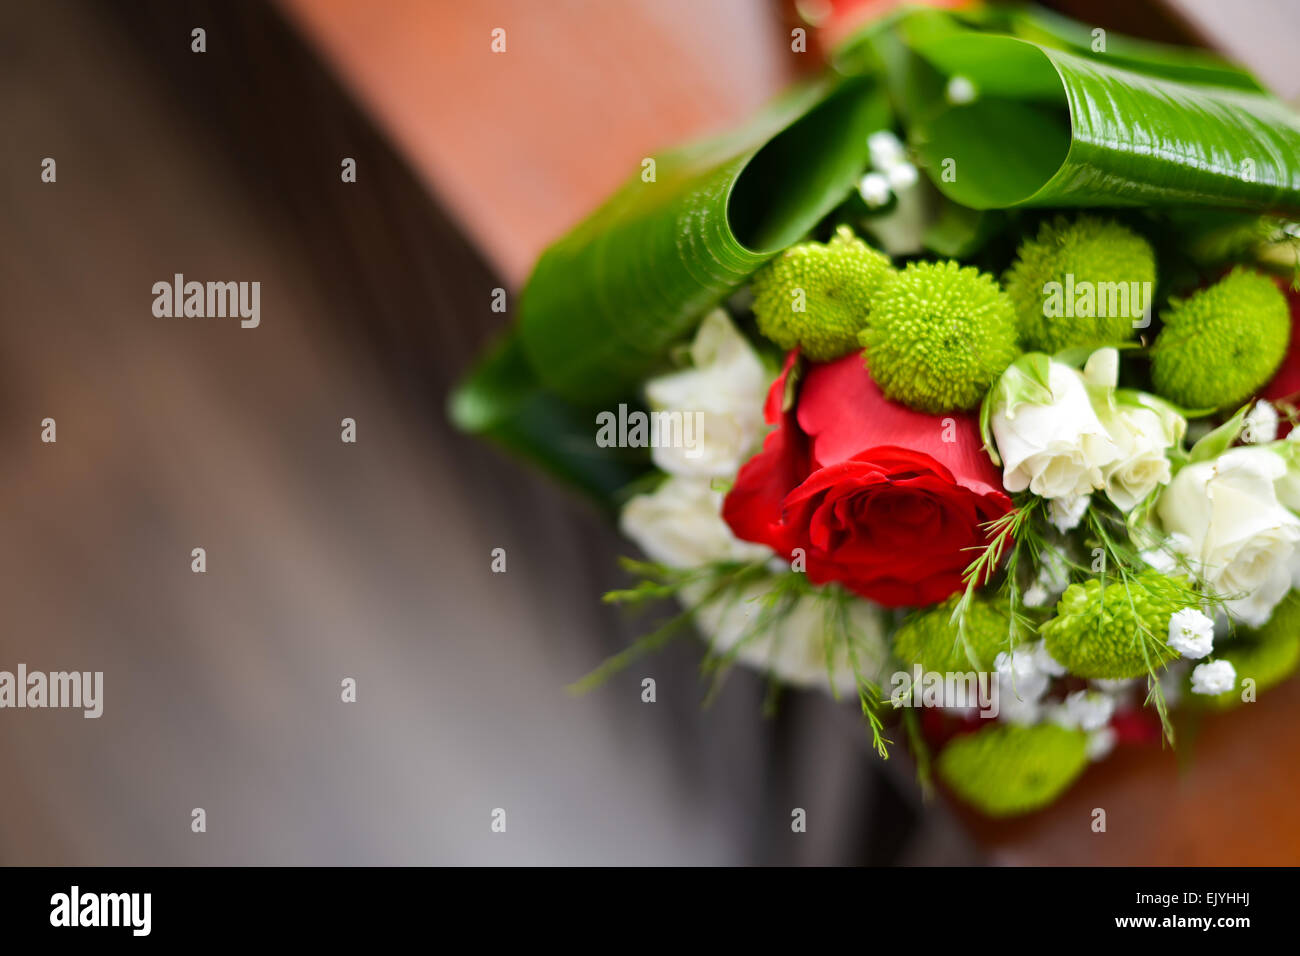 Wedding bouquet with various flowers Stock Photo